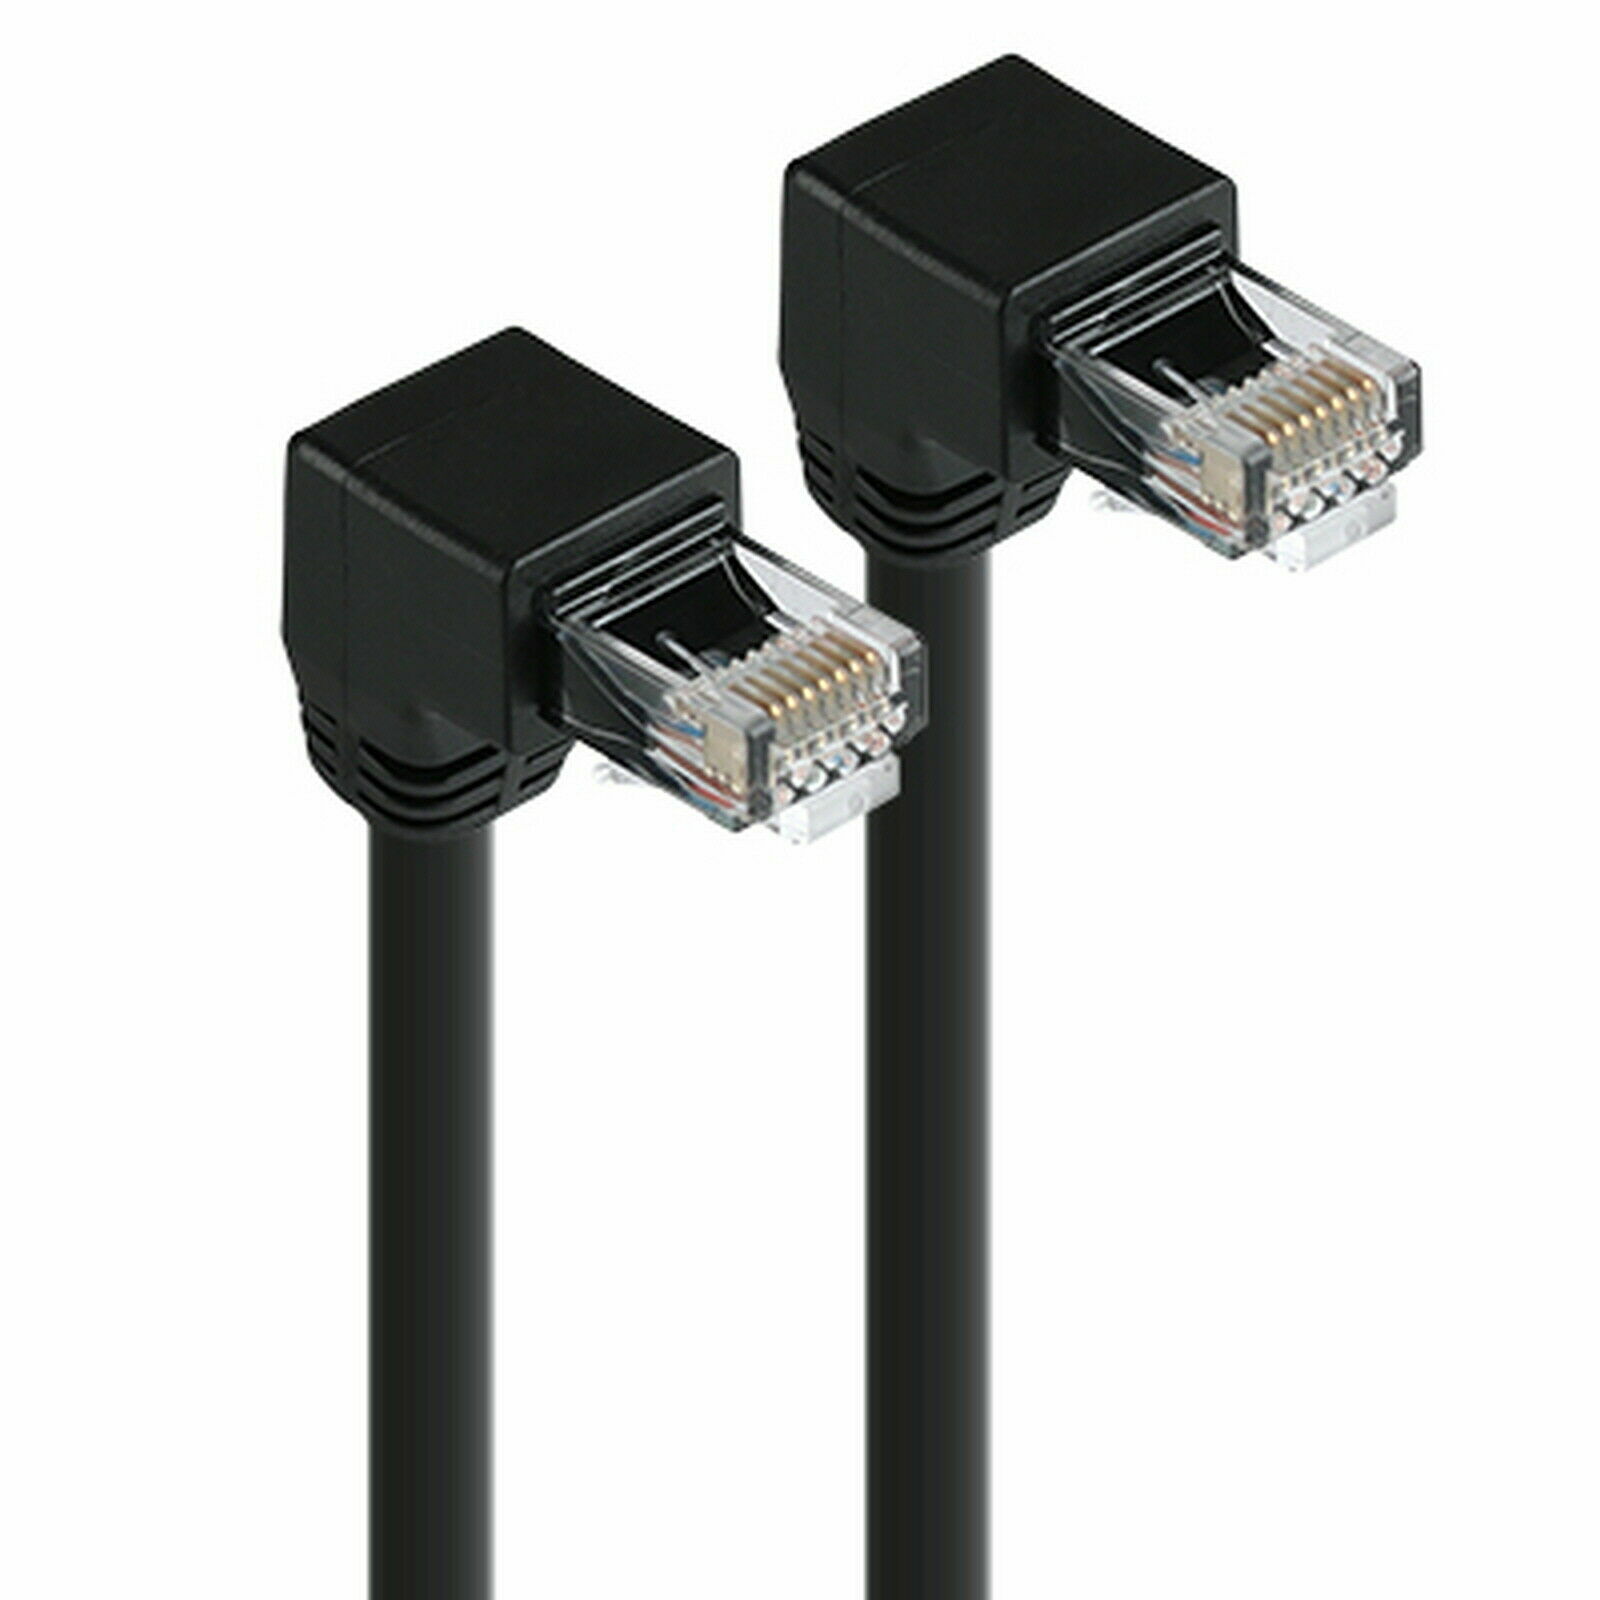 Right Angle Down 90 Degree Cat5E Utp Lan Cable 10/100Ethernet 1,2,3,5,10,15,20M